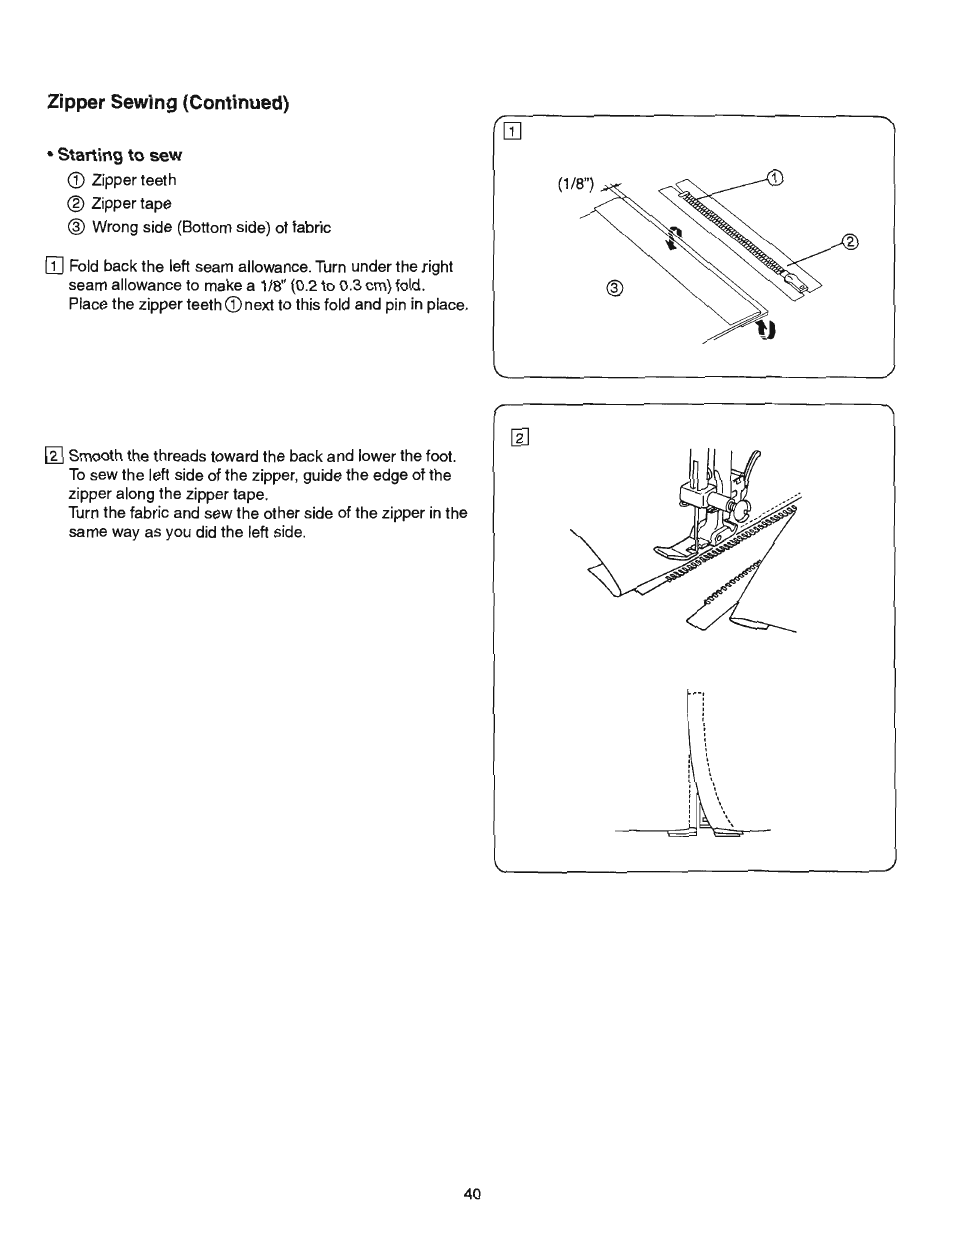 Zipper sewing (continued) | SINGER 384.13012 (Sold at Sears) User Manual | Page 40 / 79